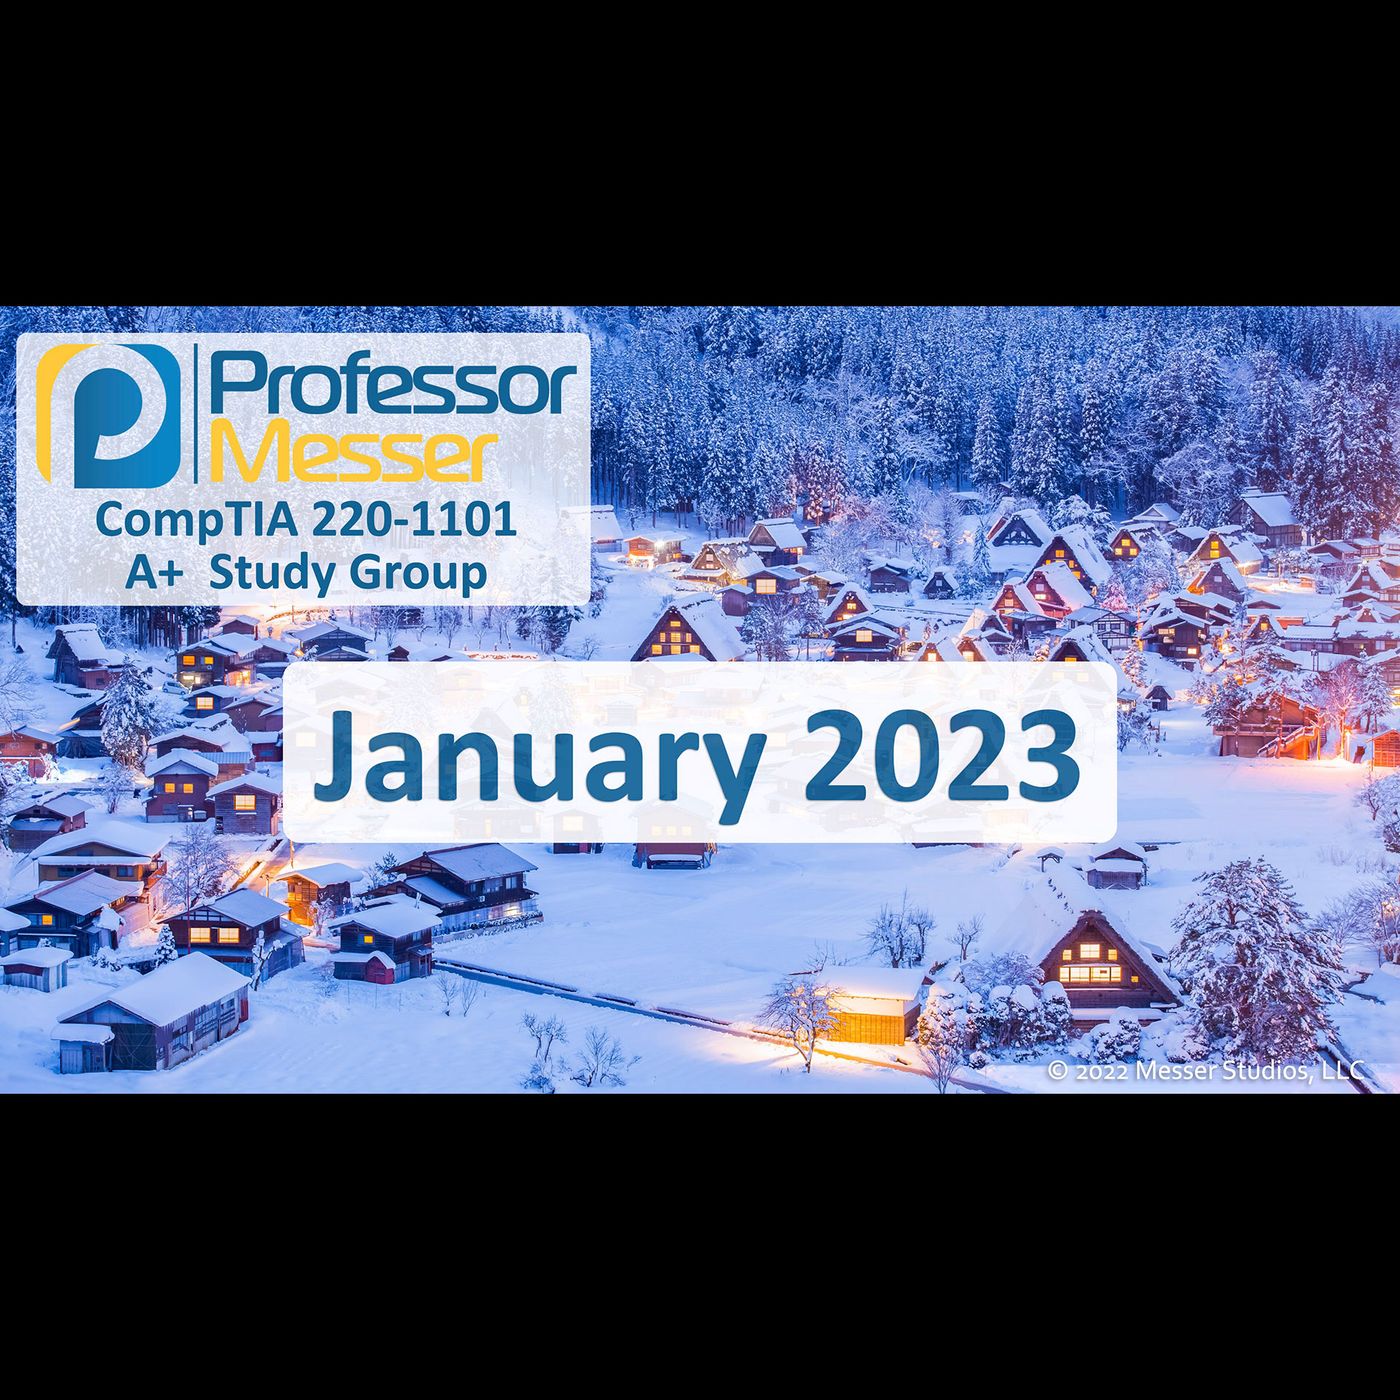 Professor Messer's CompTIA 220-1101 A+ Study Group After Show - January 2023